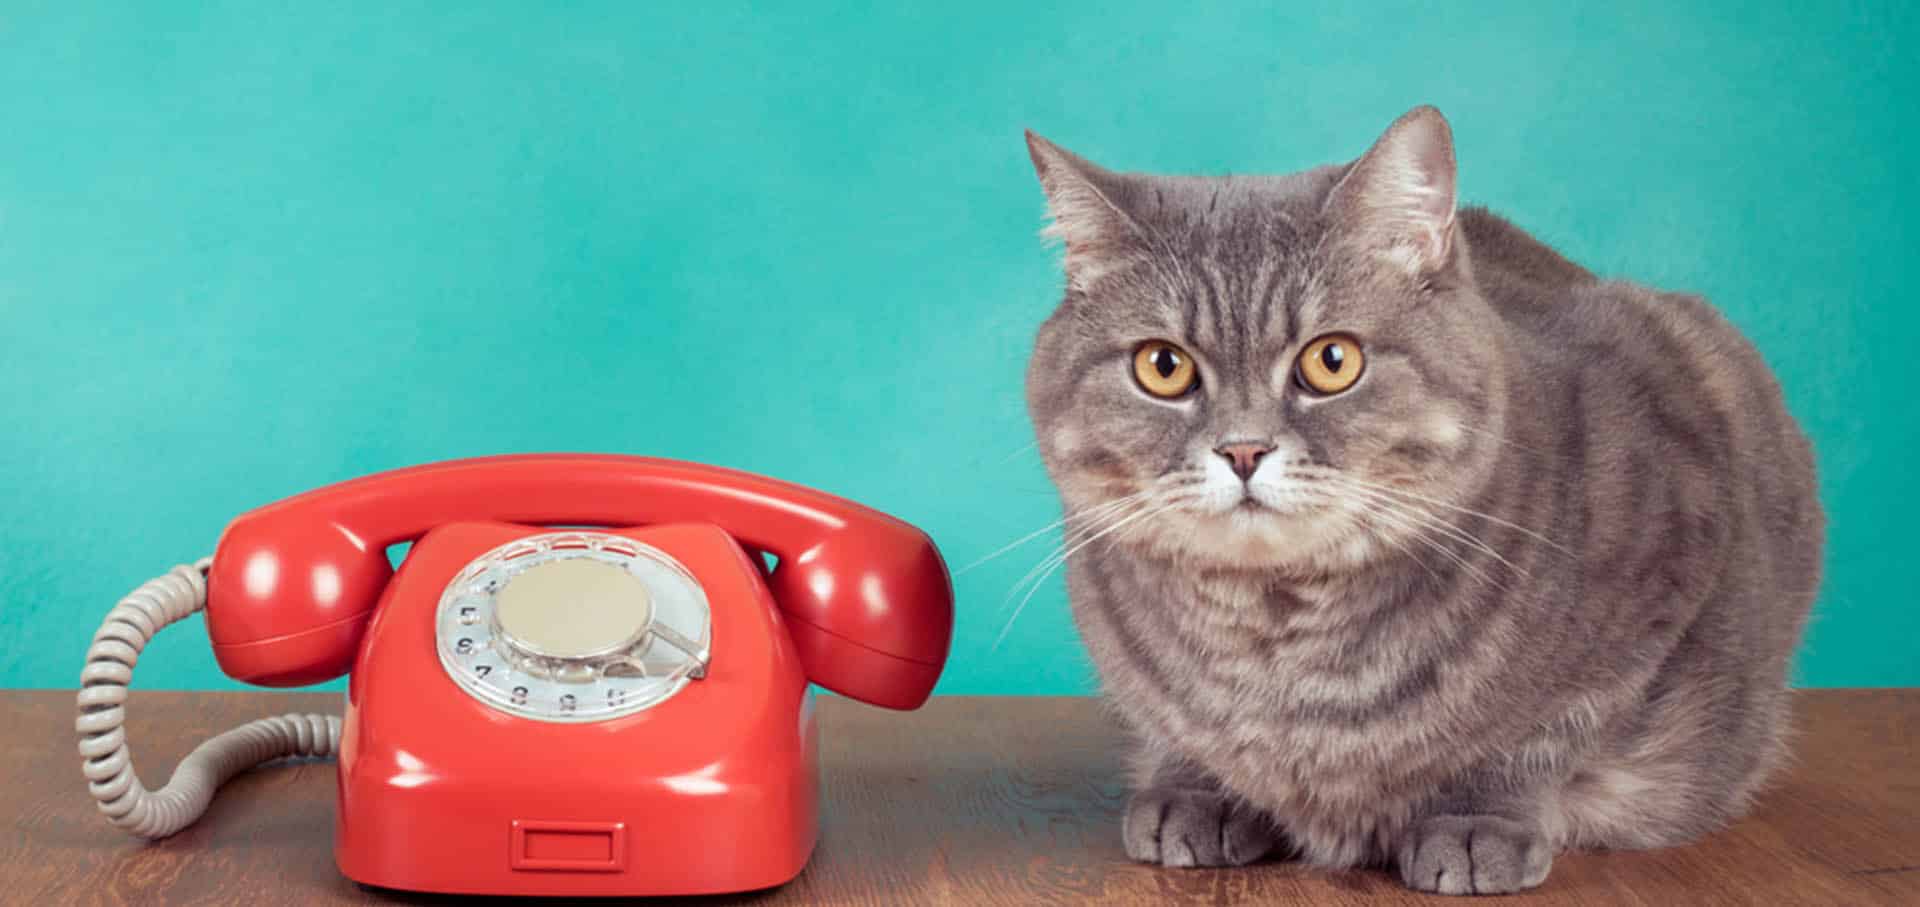 Cat beside a red retro telephone — Best Veterinary Services in Bundaberg, QLD